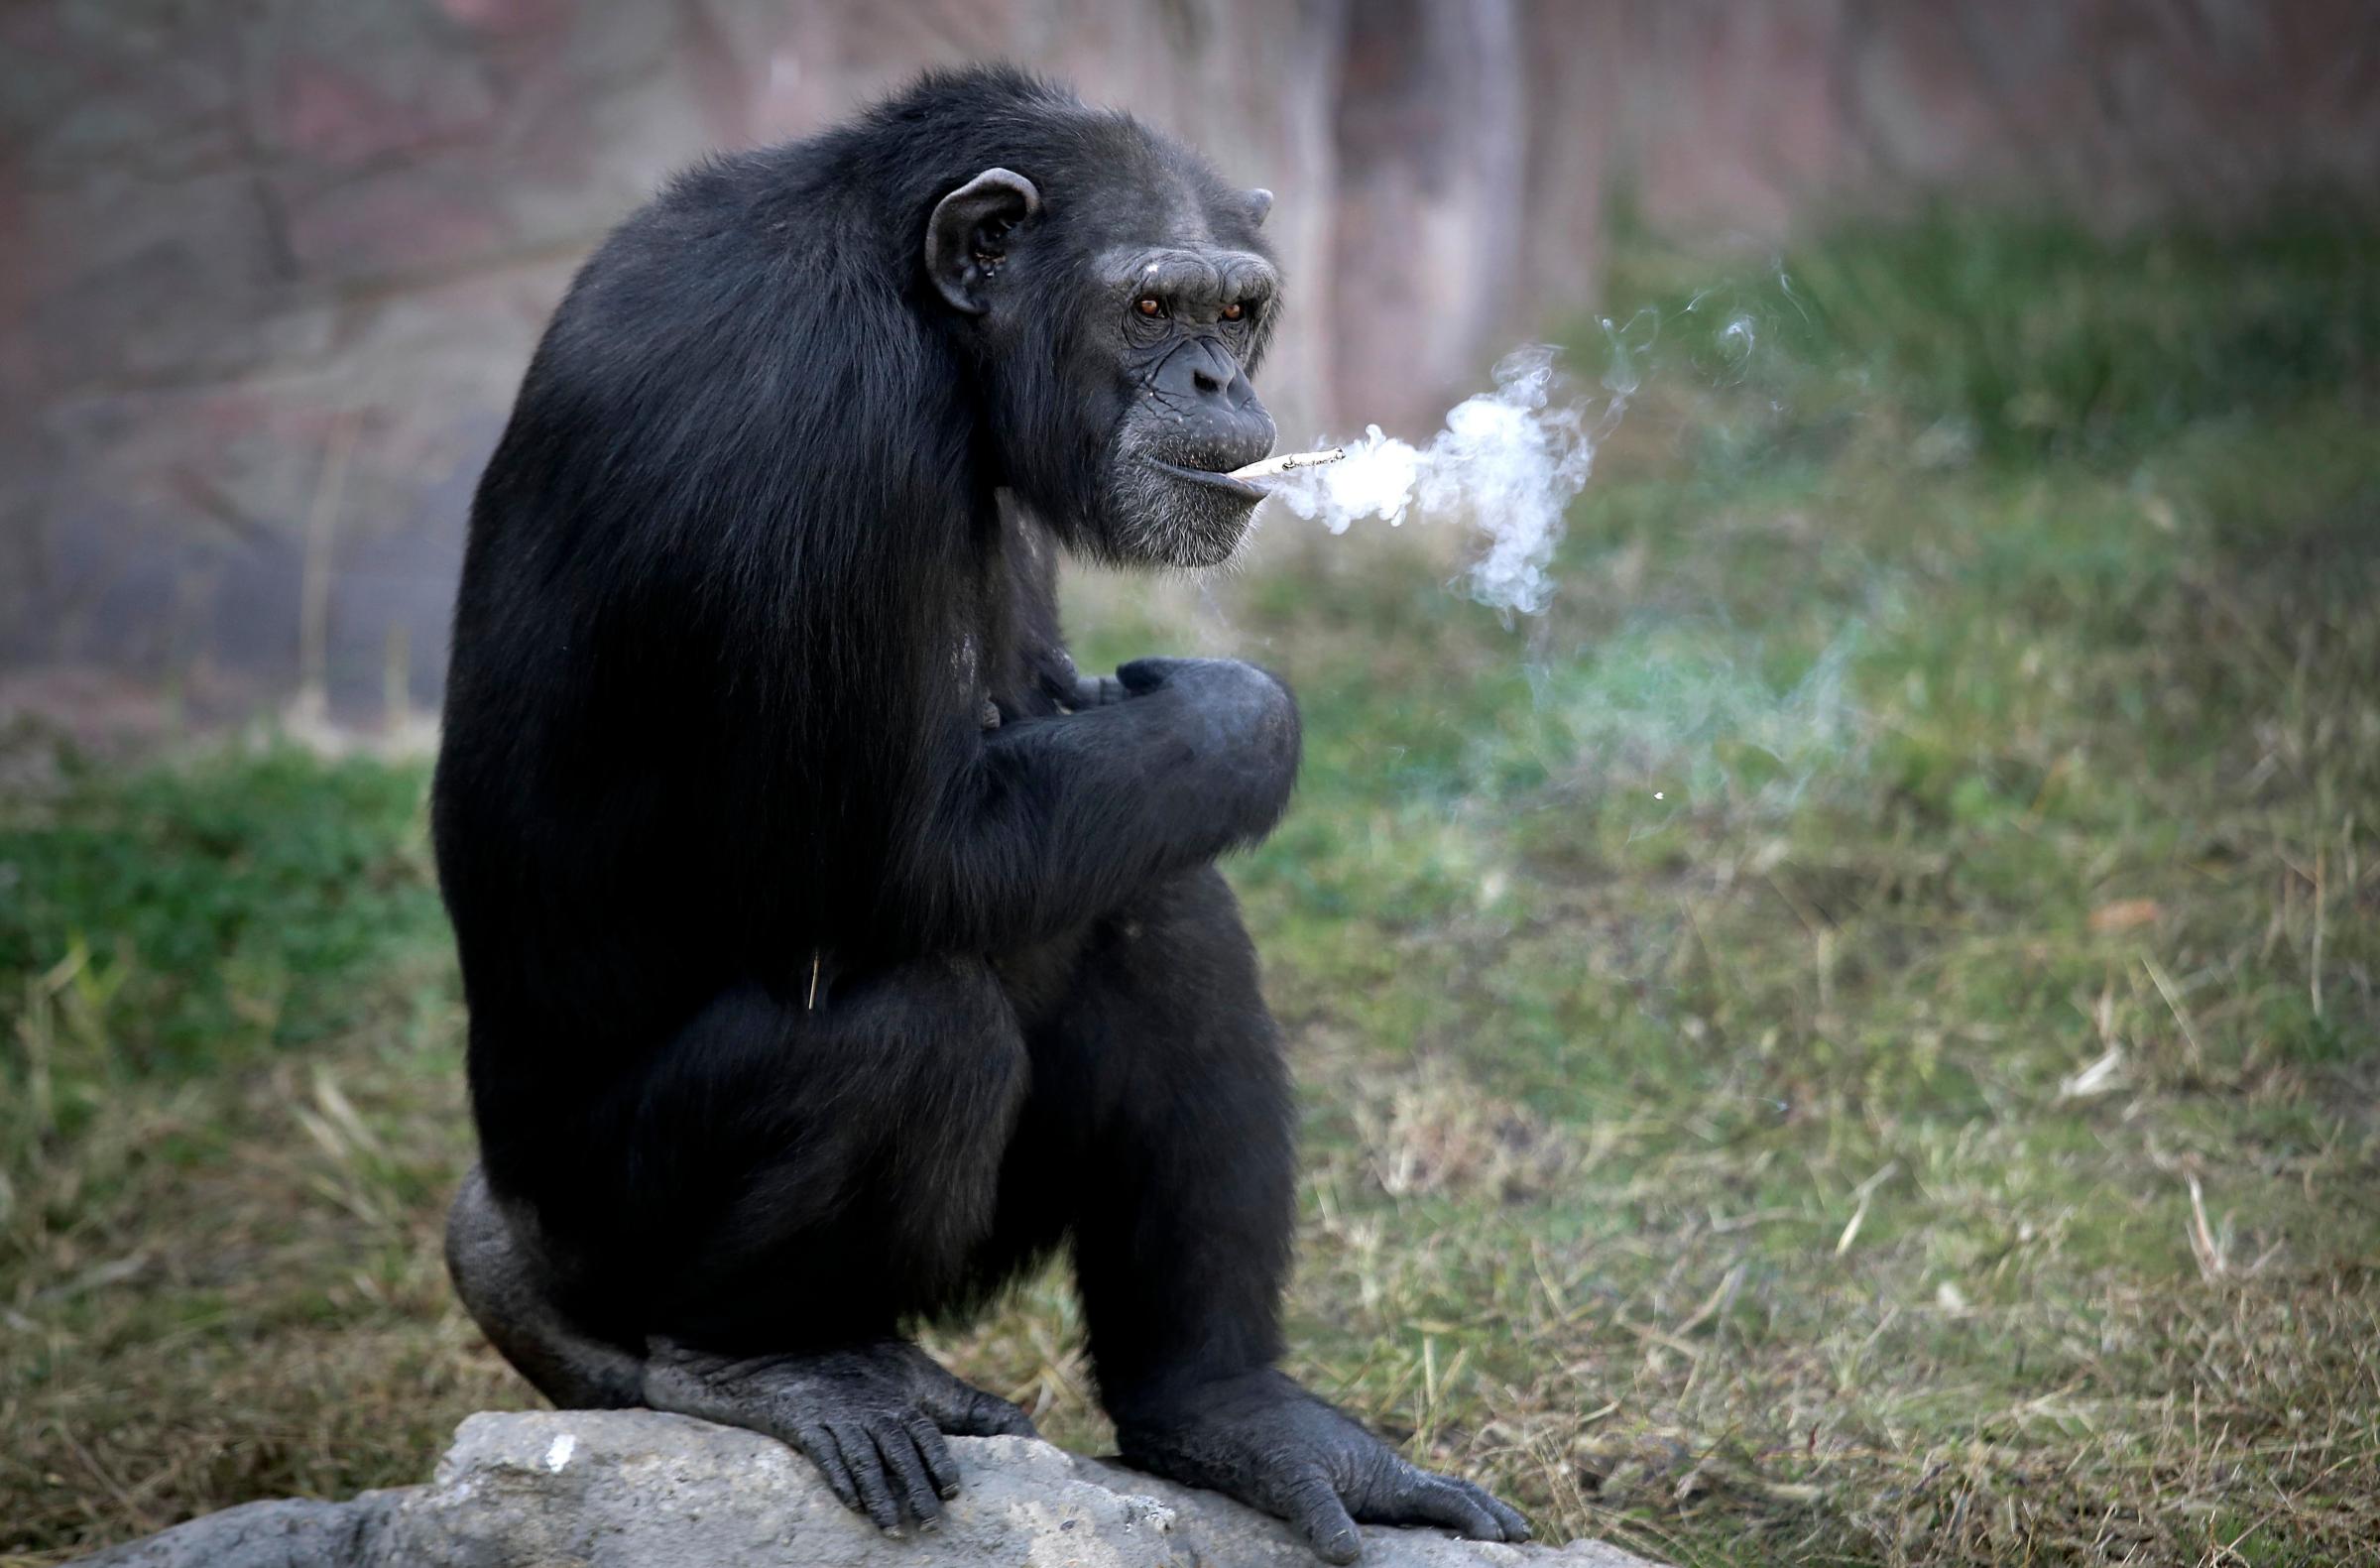 Azalea, a 19-year-old female chimpanzee whose Korean name is "Dallae," smokes a cigarette at the Central Zoo in Pyongyang, North Korea, on Oct. 19, 2016.